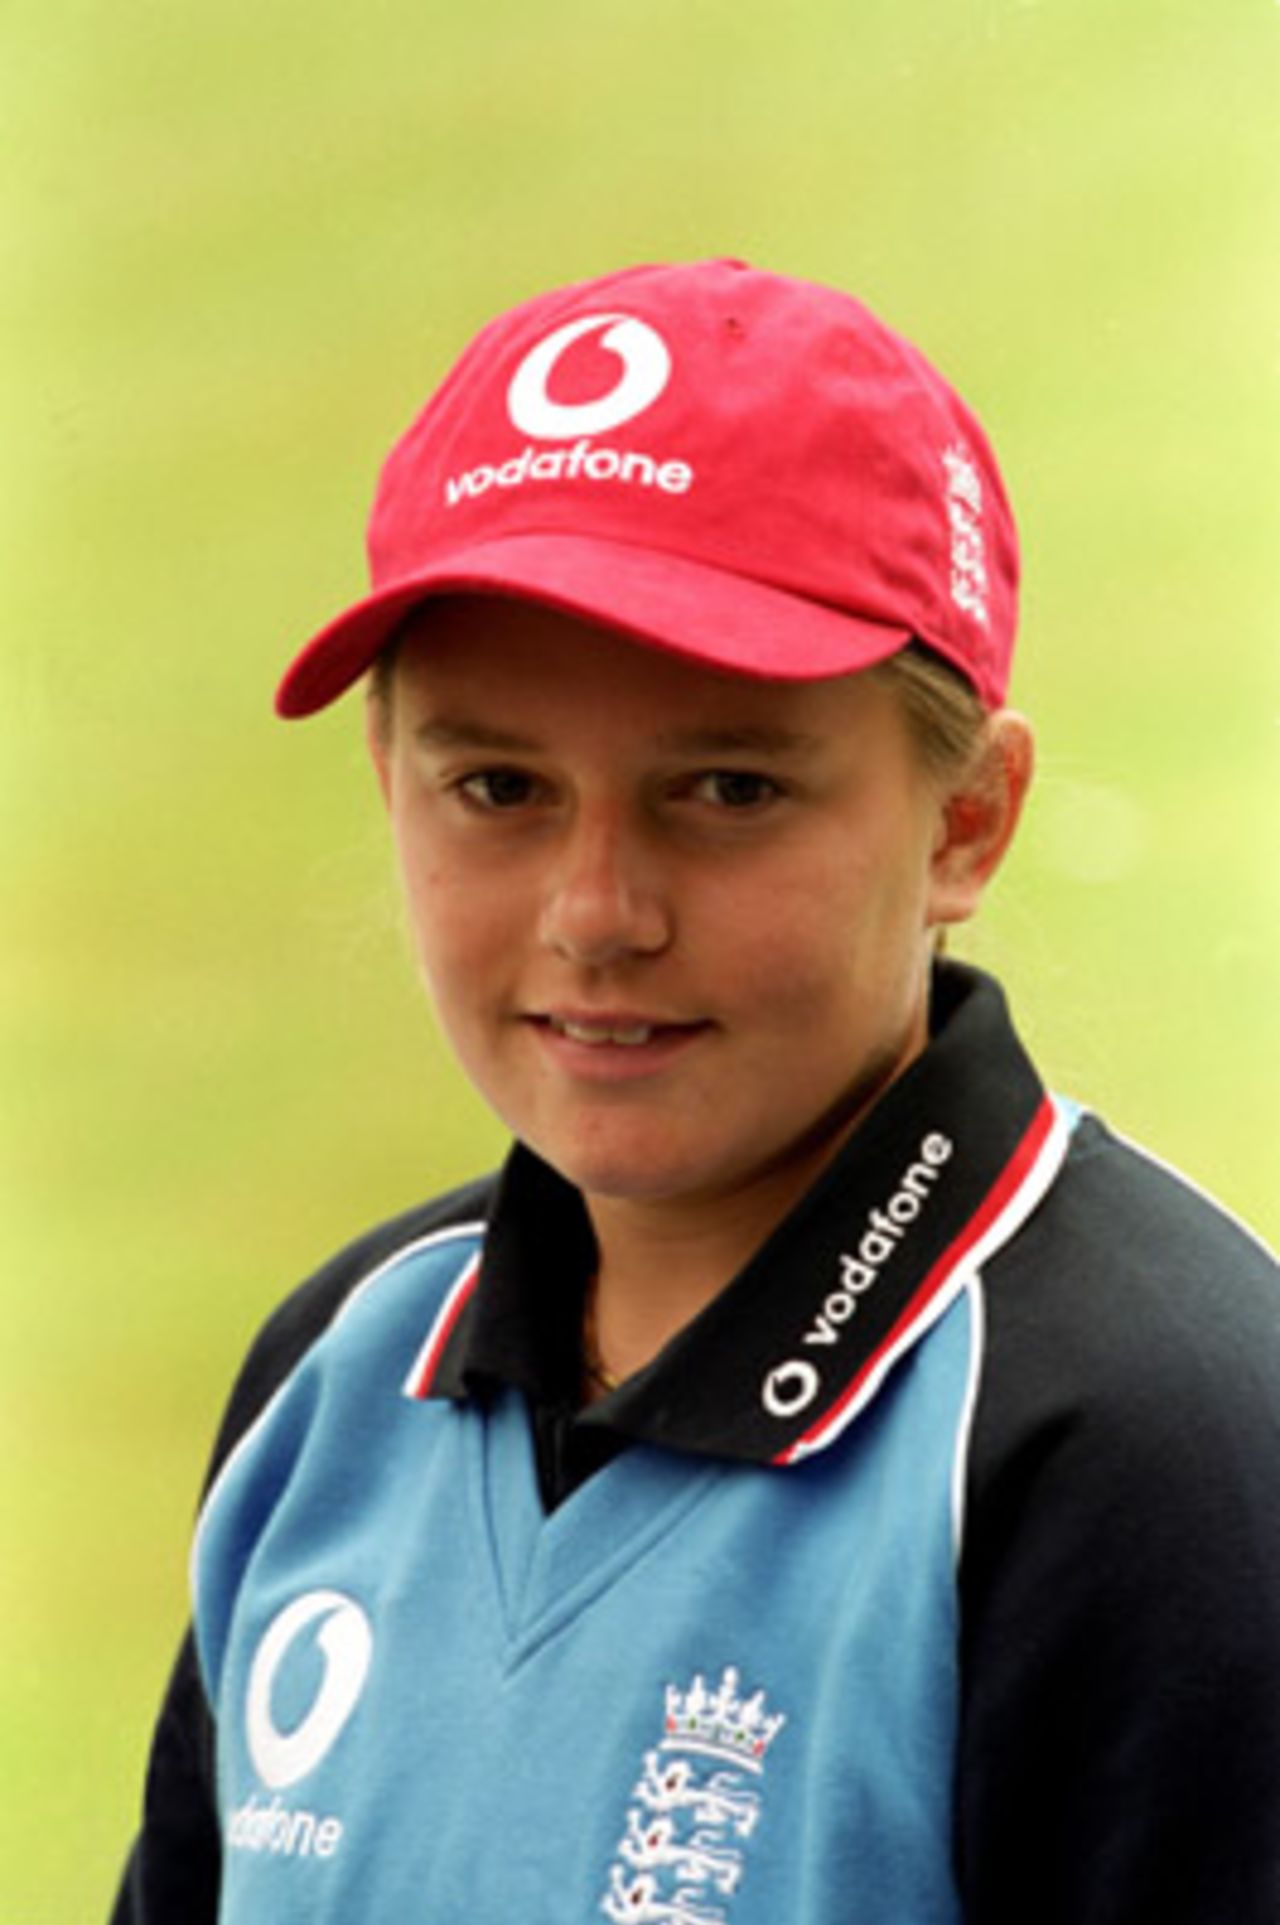 Portrait of Dawn Holden - England player in the CricInfo Women's World Cup 2000